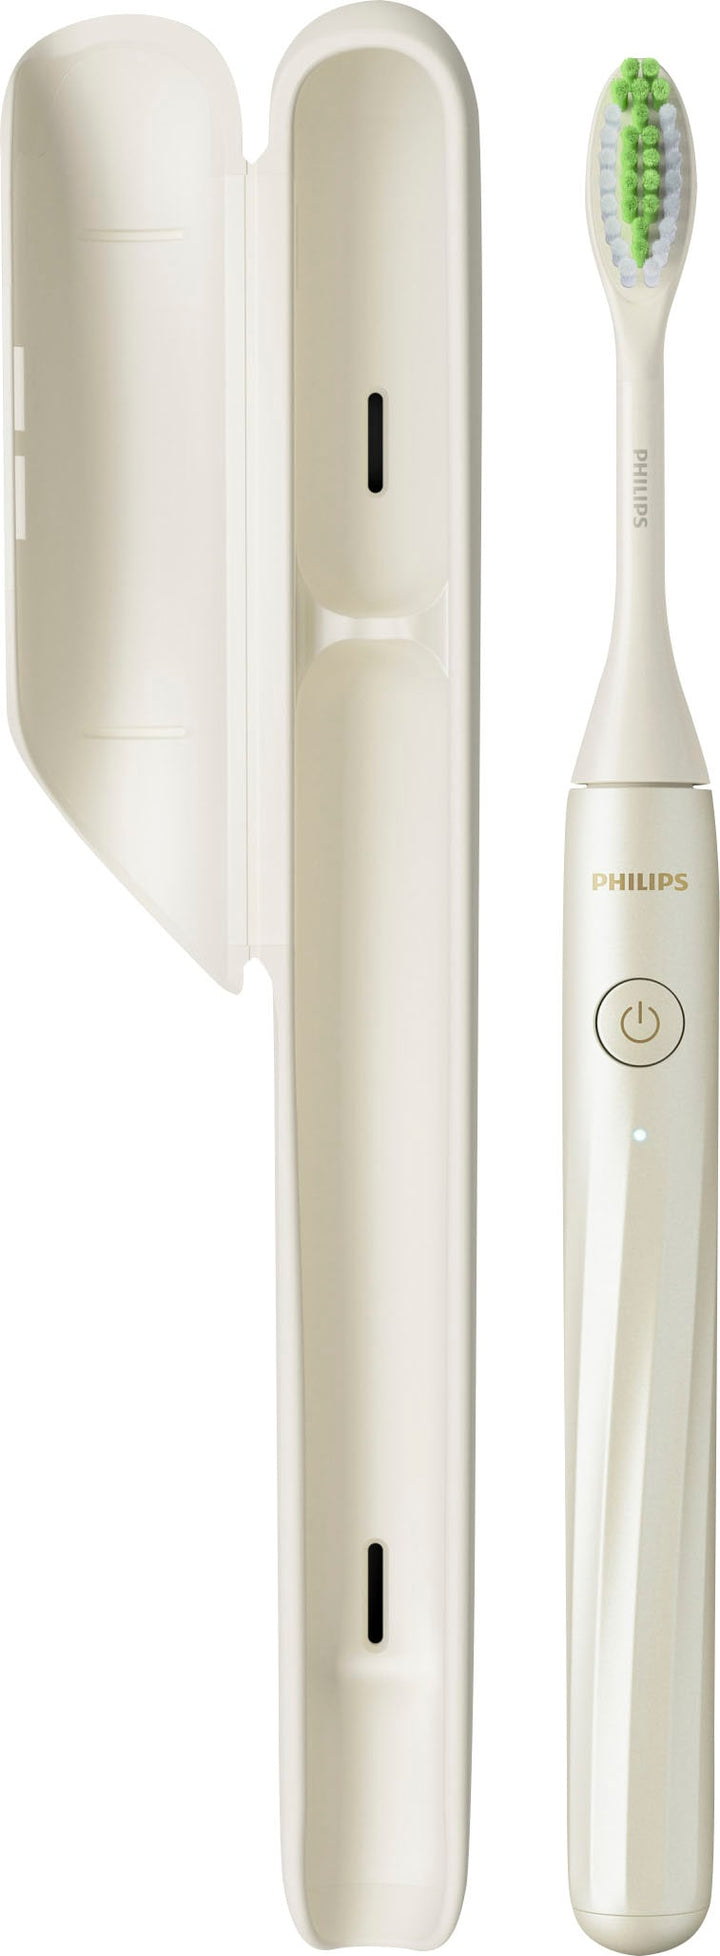 Philips Sonicare - Philips One by Sonicare Rechargeable Toothbrush - Snow_5